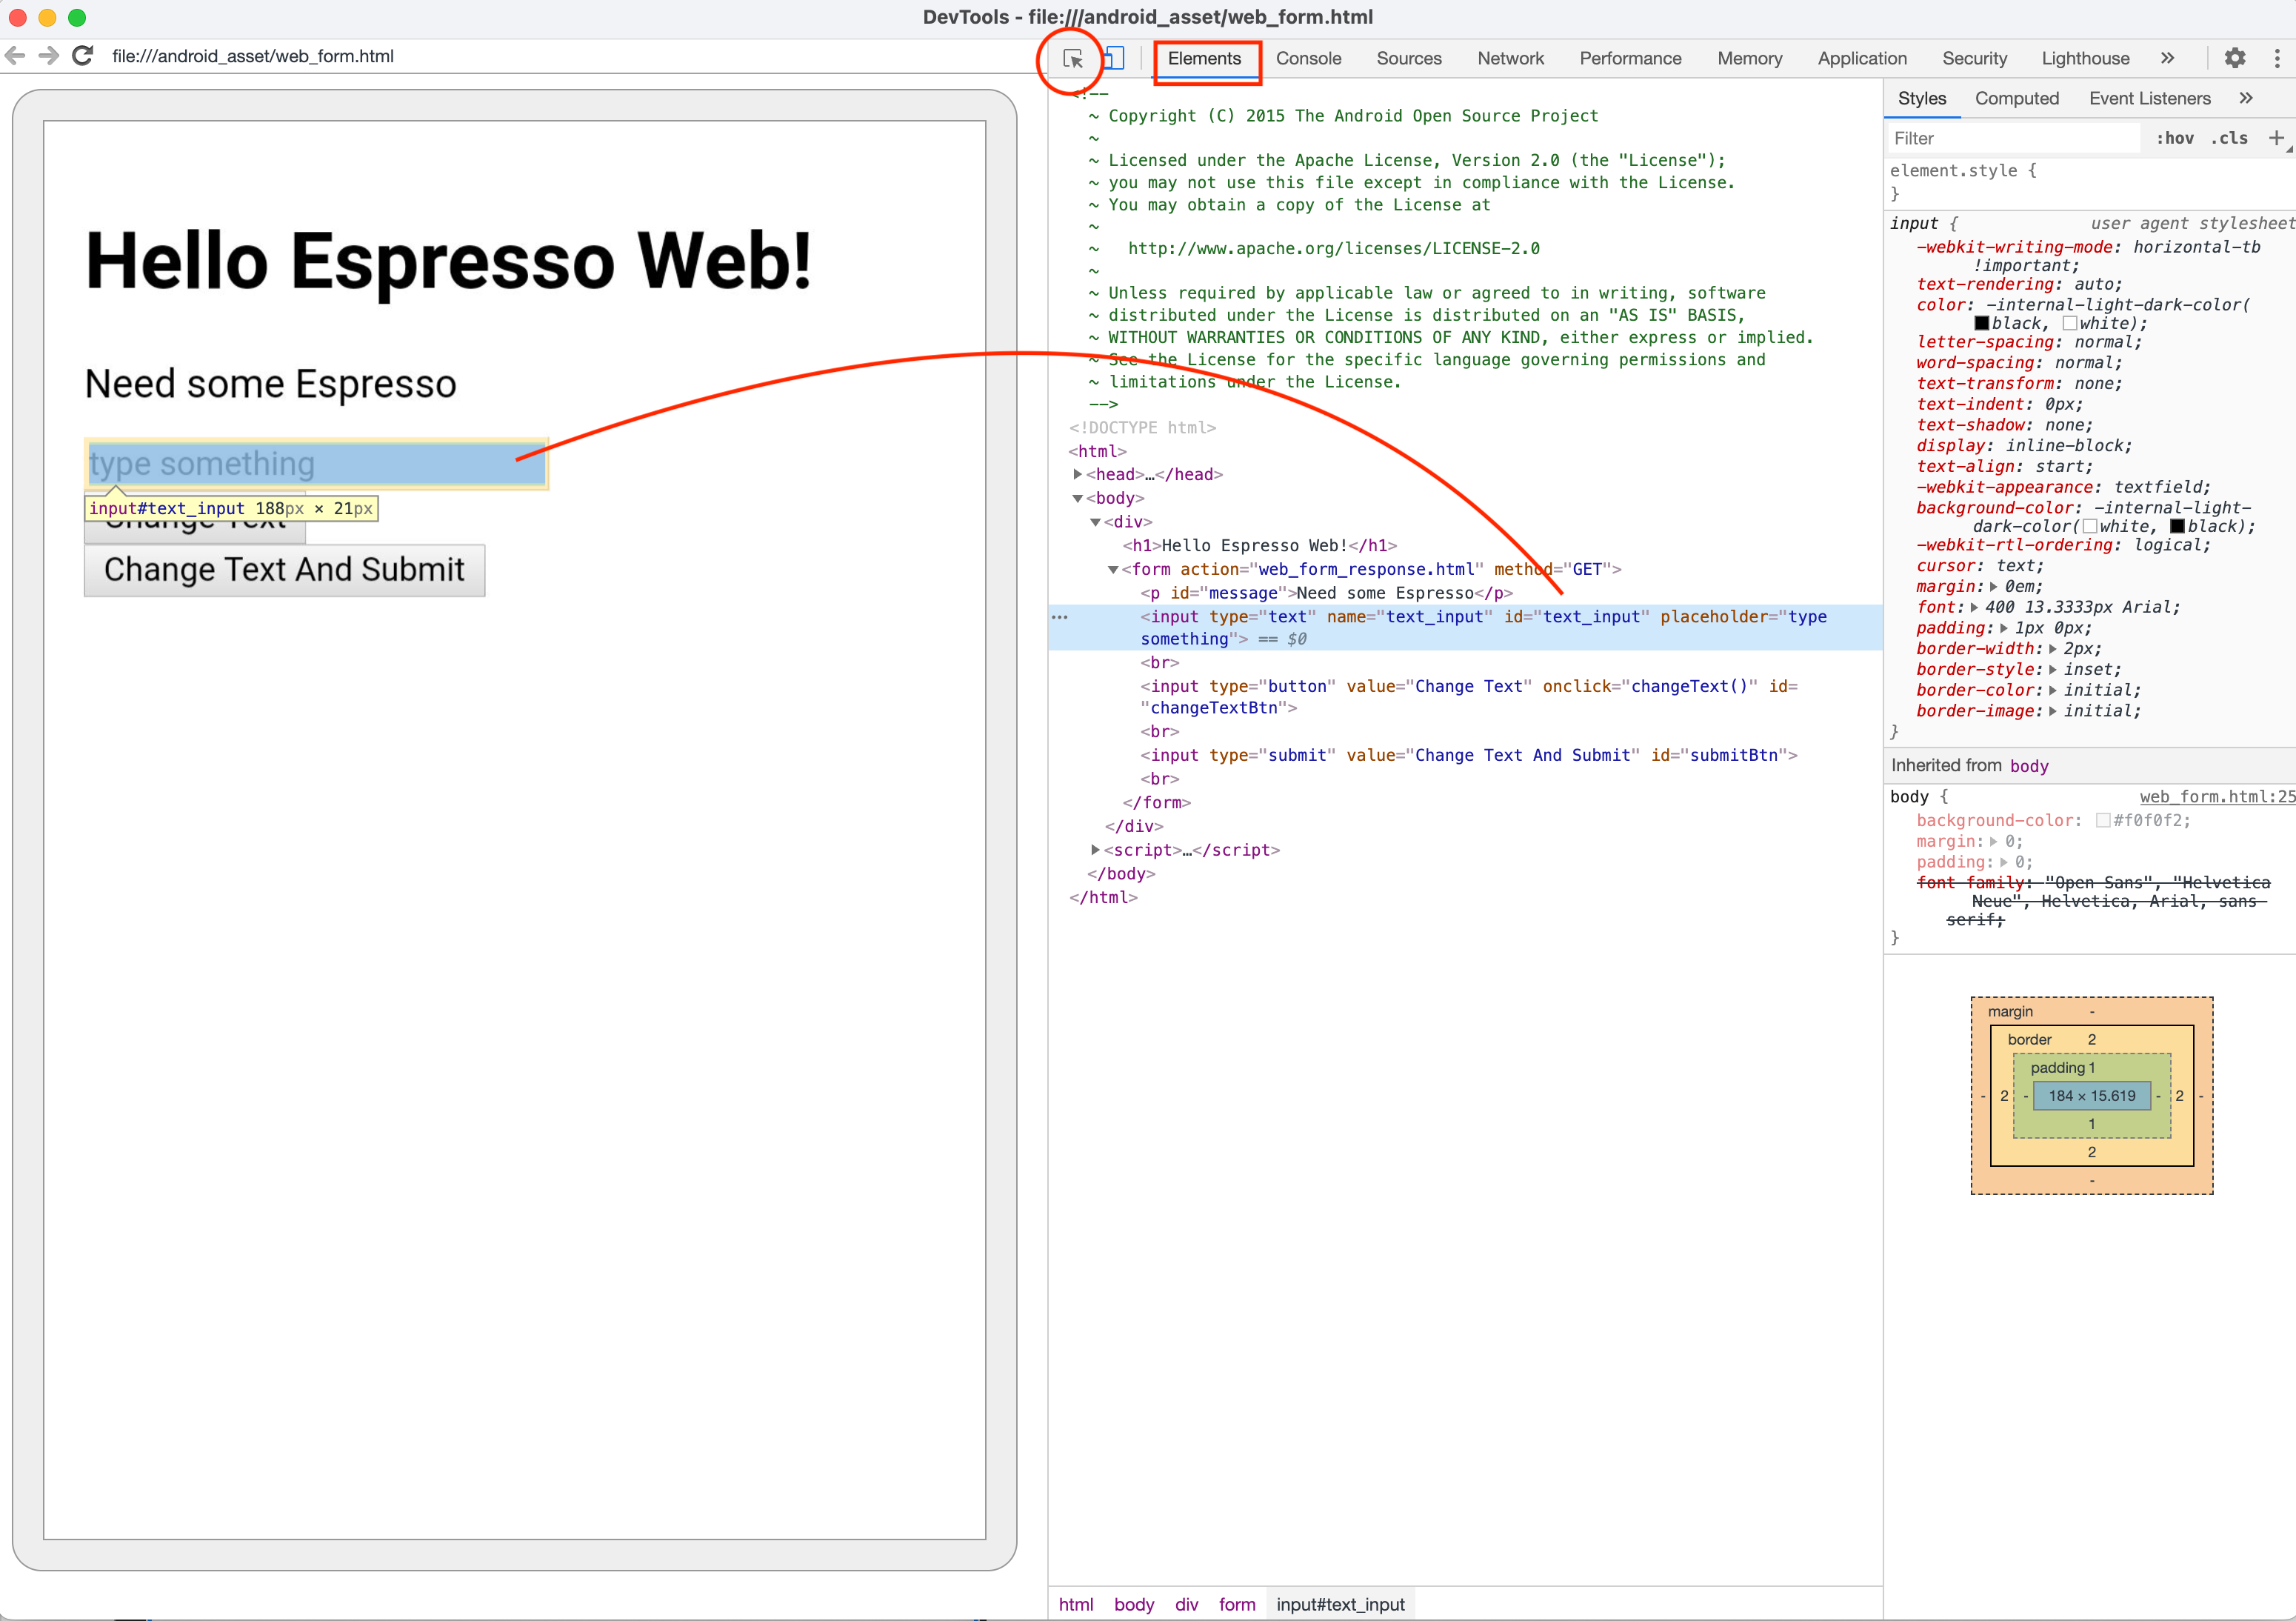 Chrome dev tools showing the webview and its associated DOM for home page